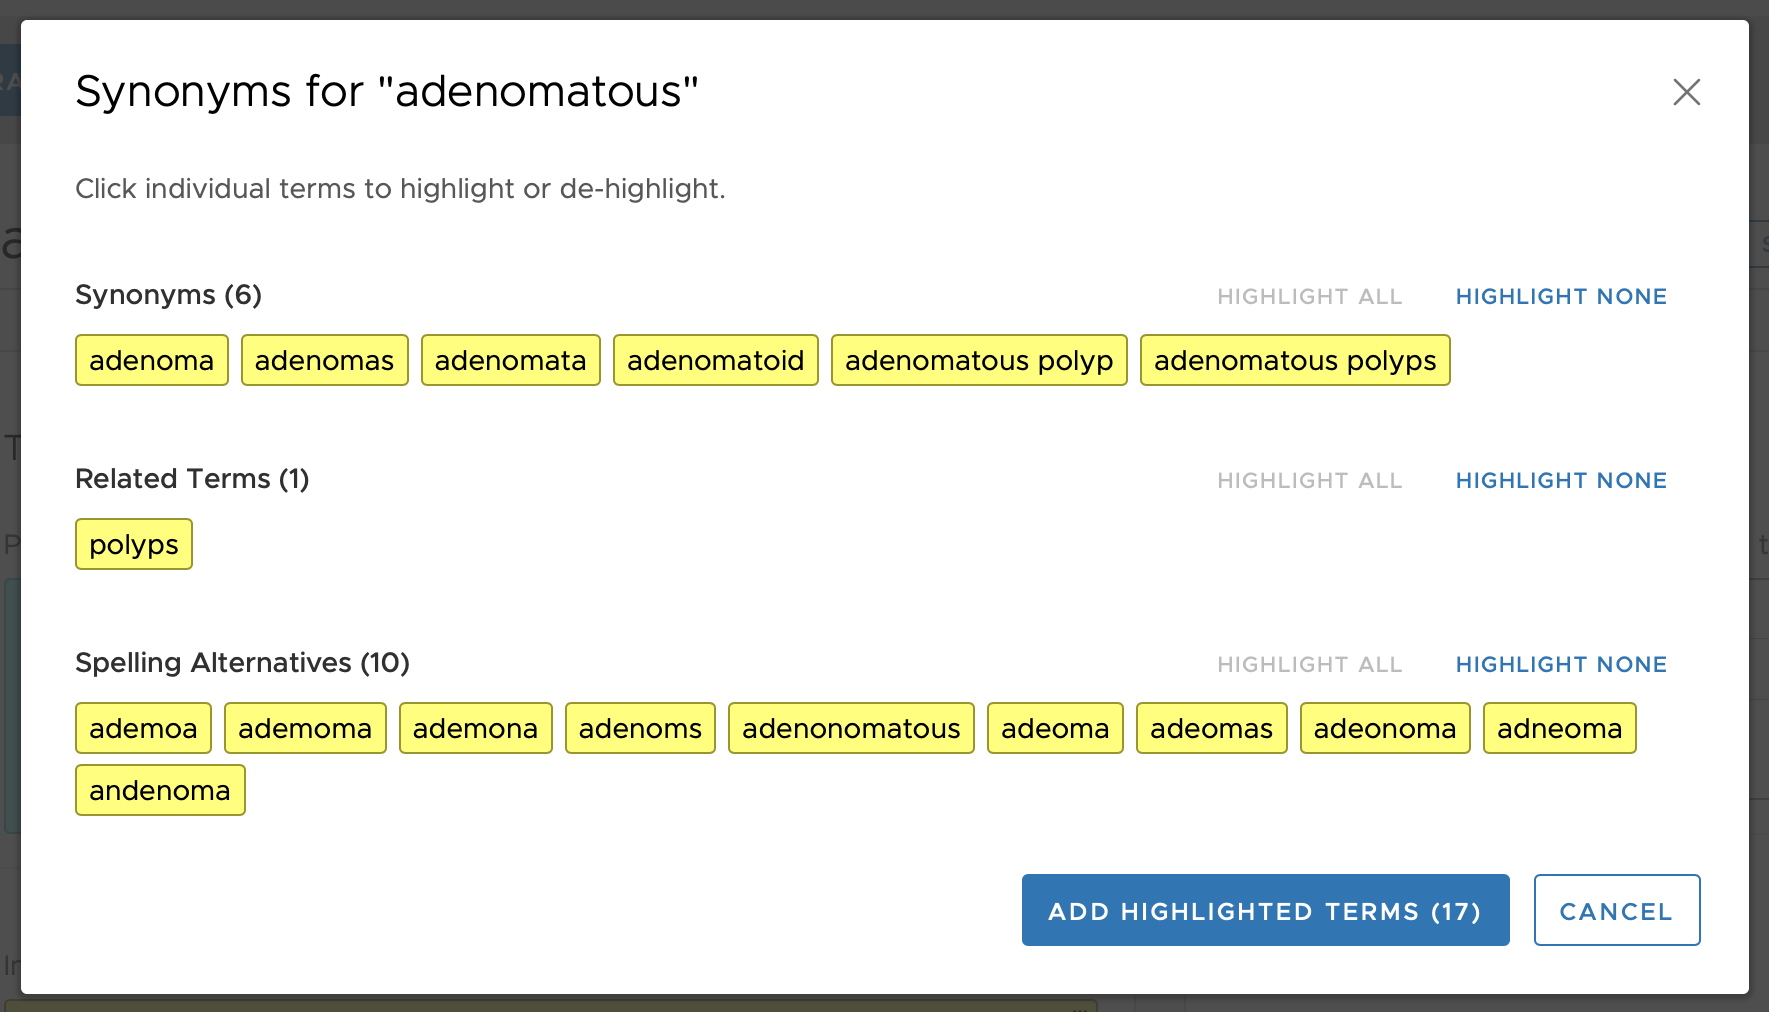 Synonyms suggestions display